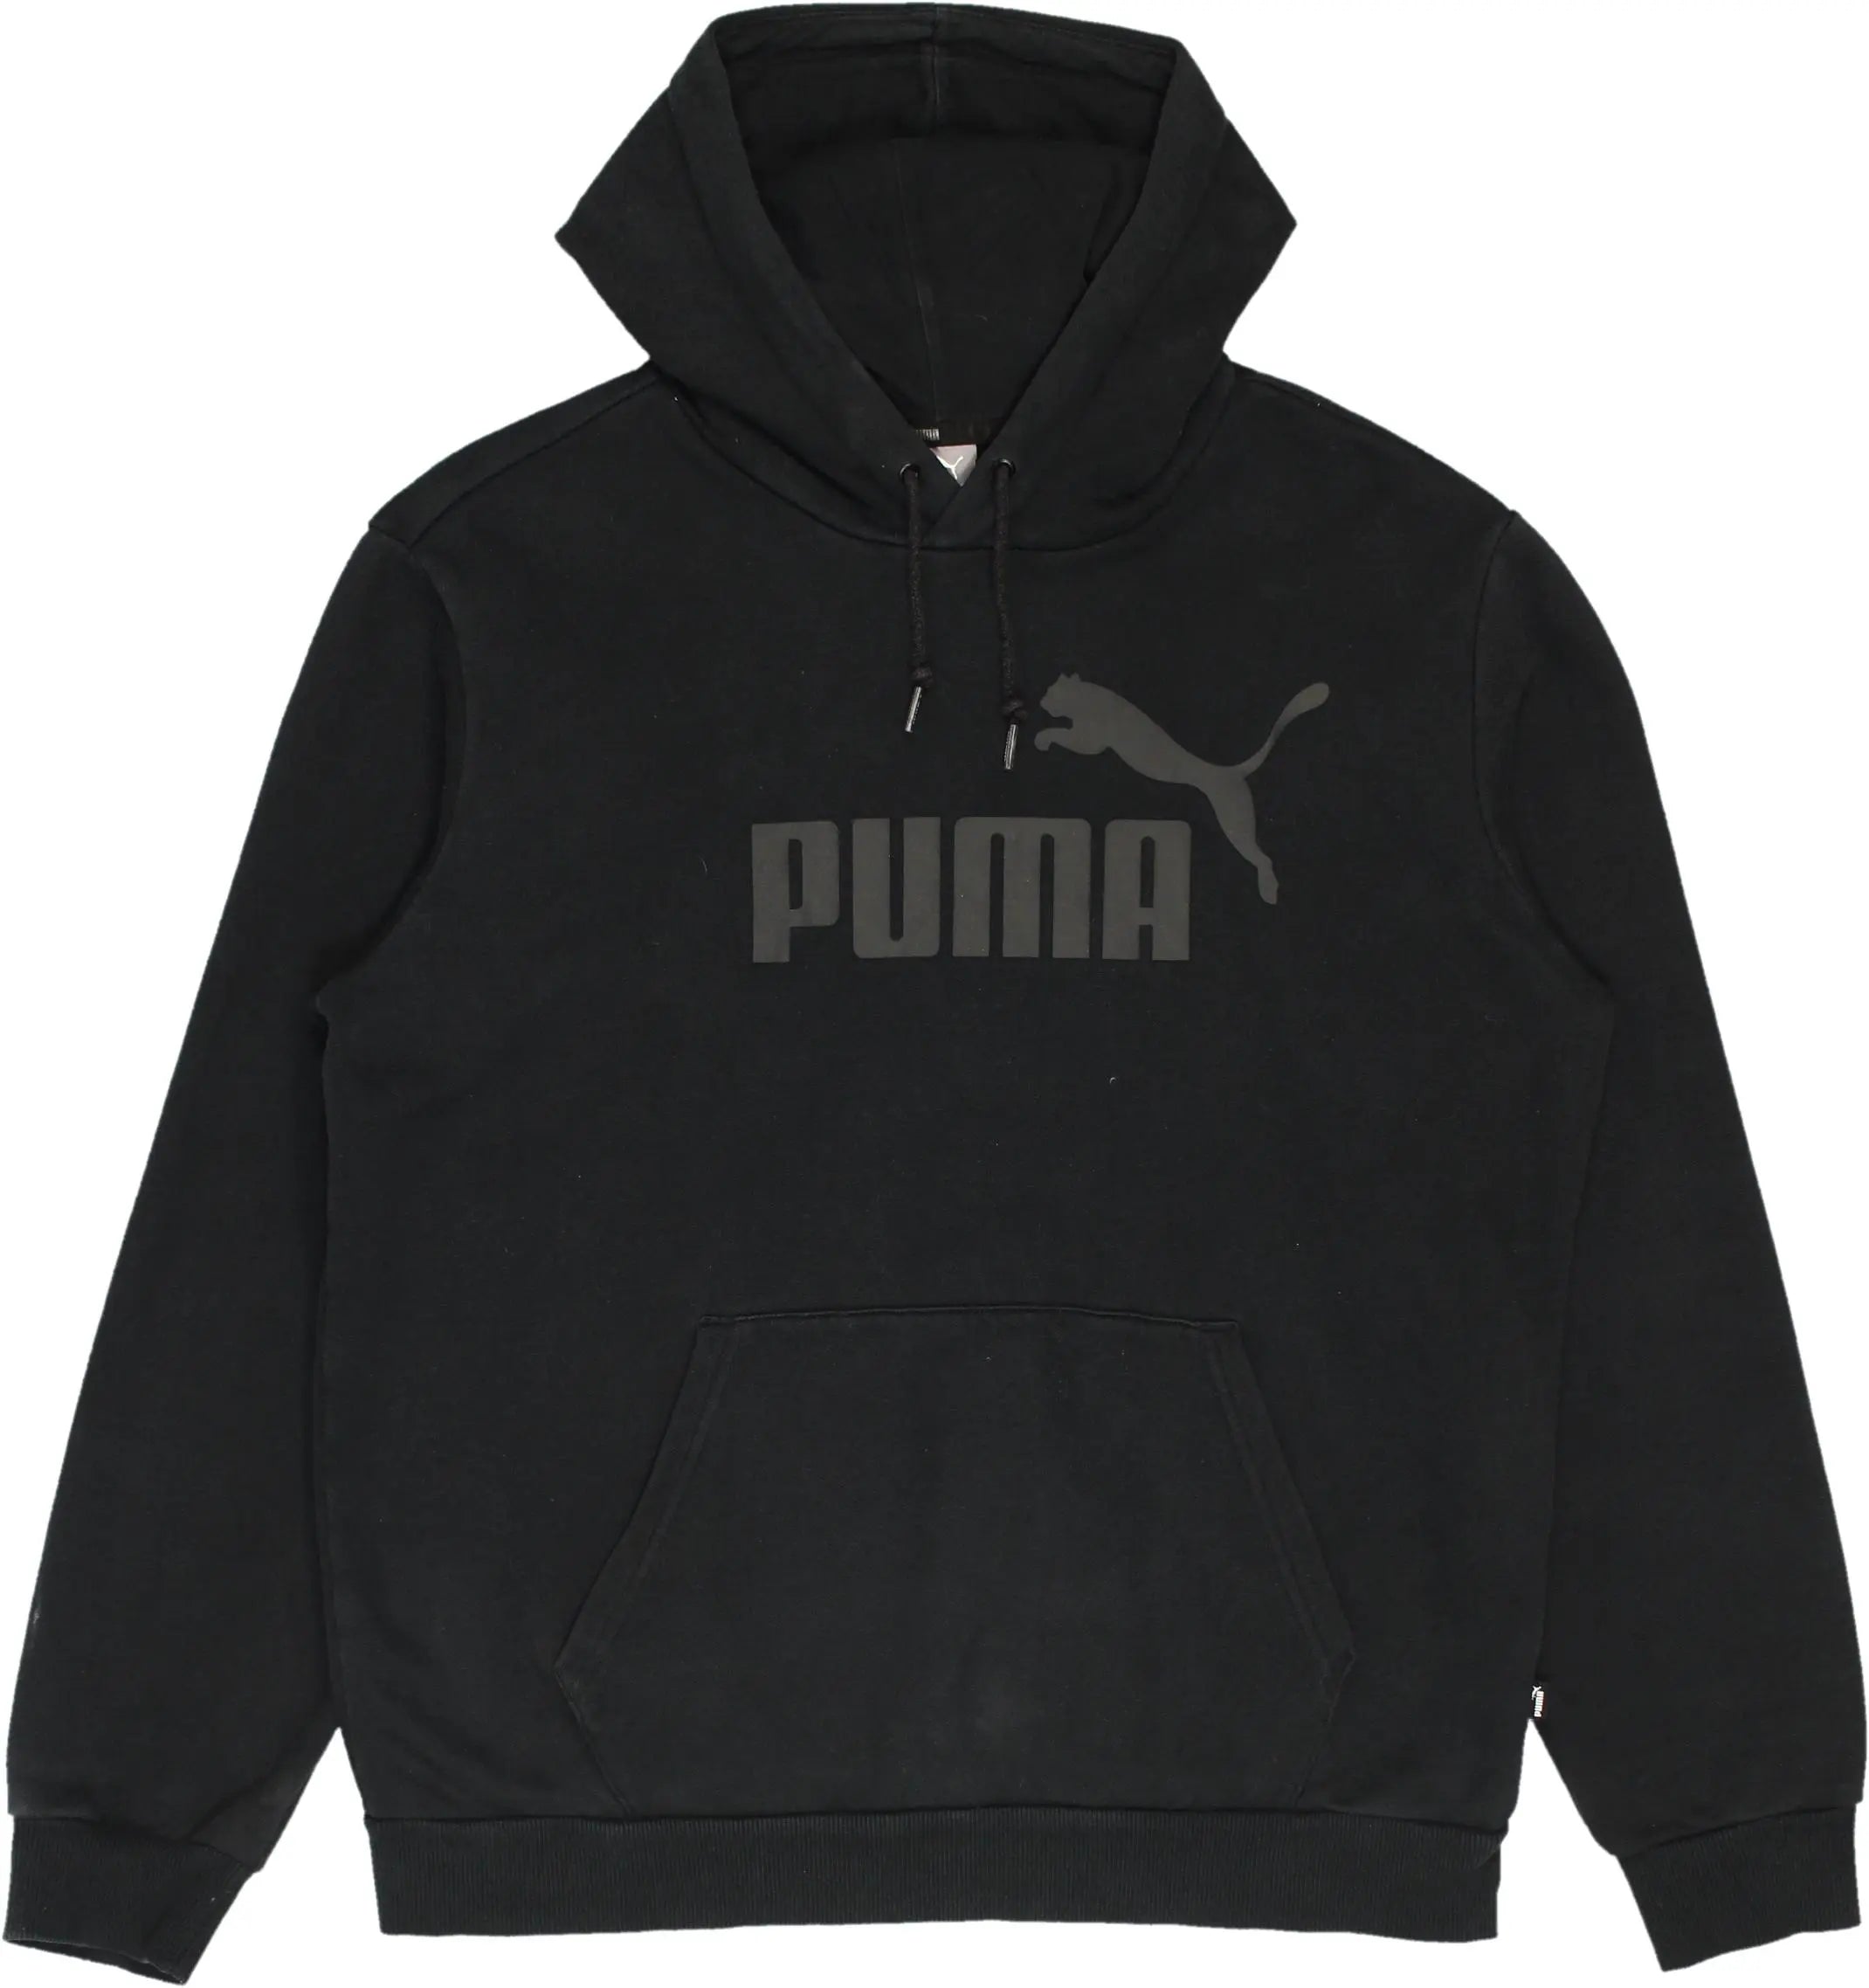 Puma - Hoodie by Puma- ThriftTale.com - Vintage and second handclothing